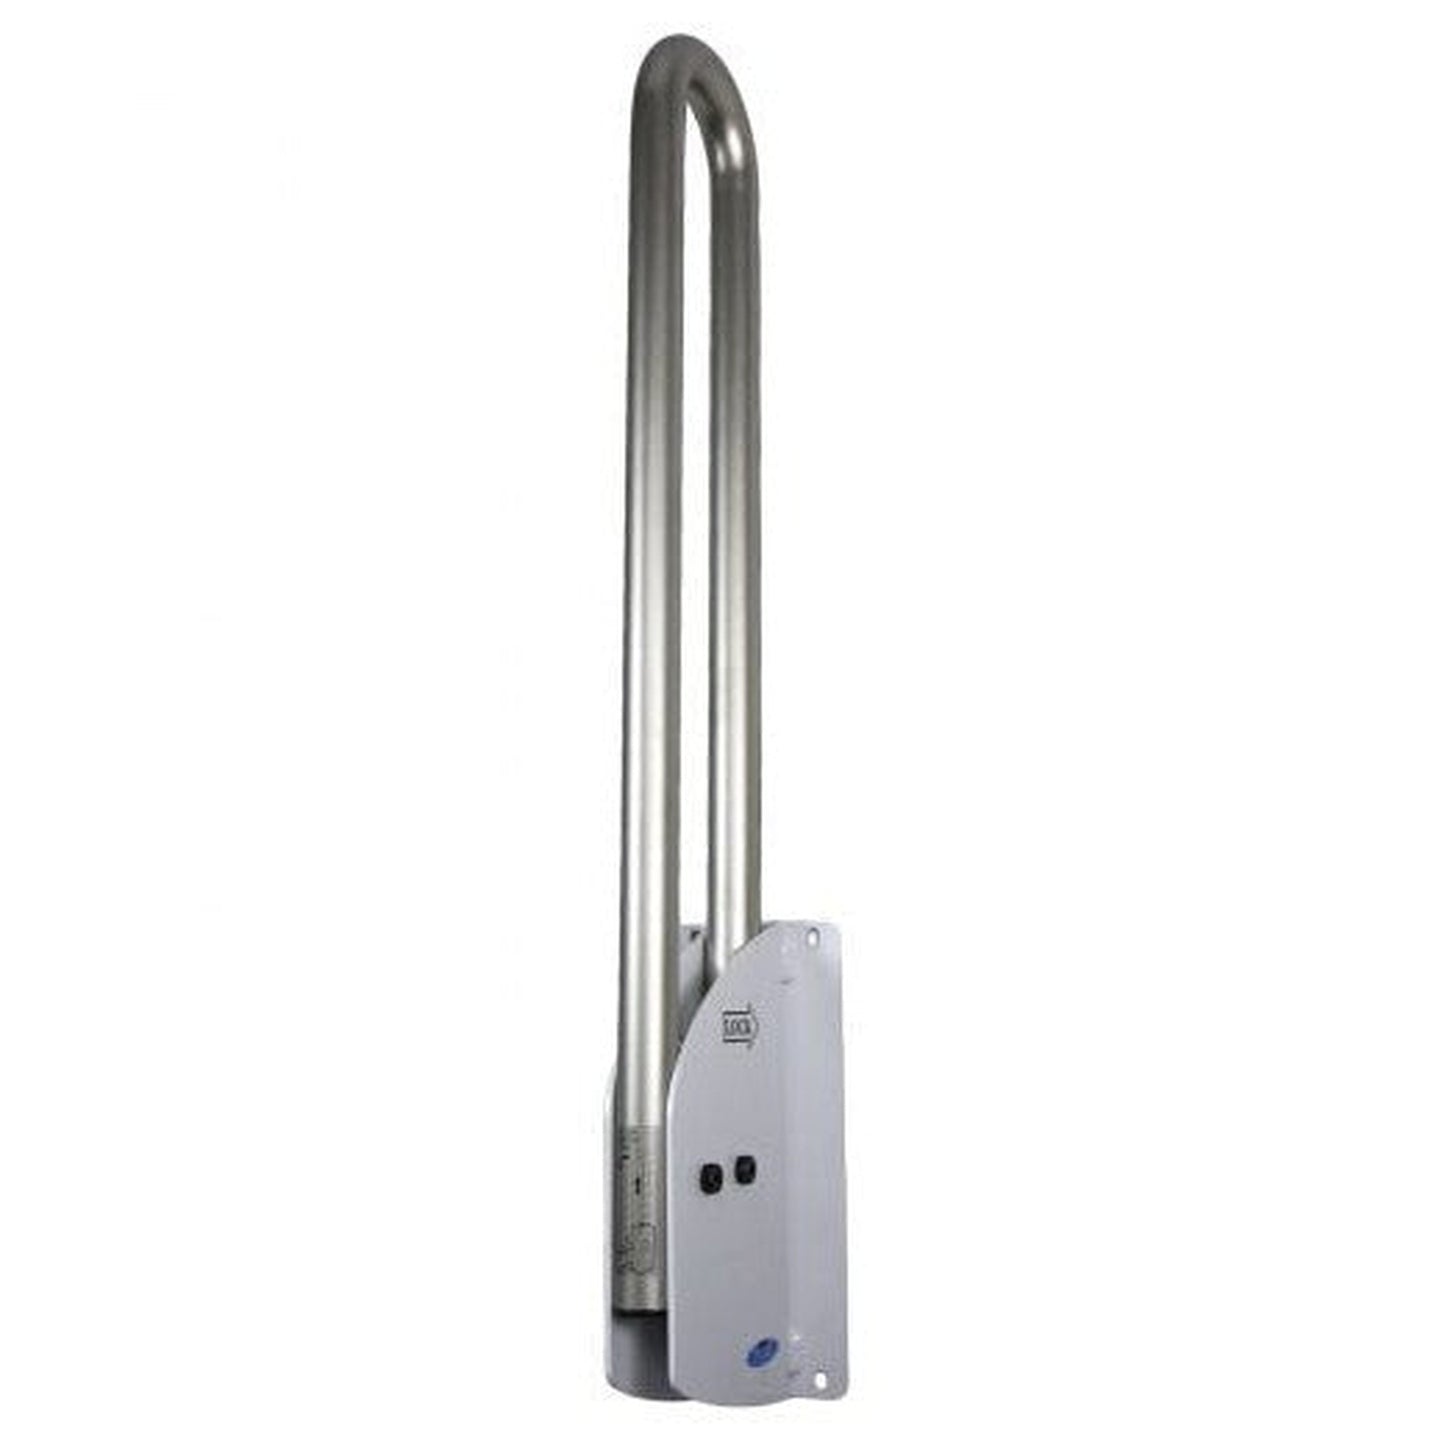 Frost 29.2 x 4.4 x 11 Stainless Steel Brushed Grab Bar